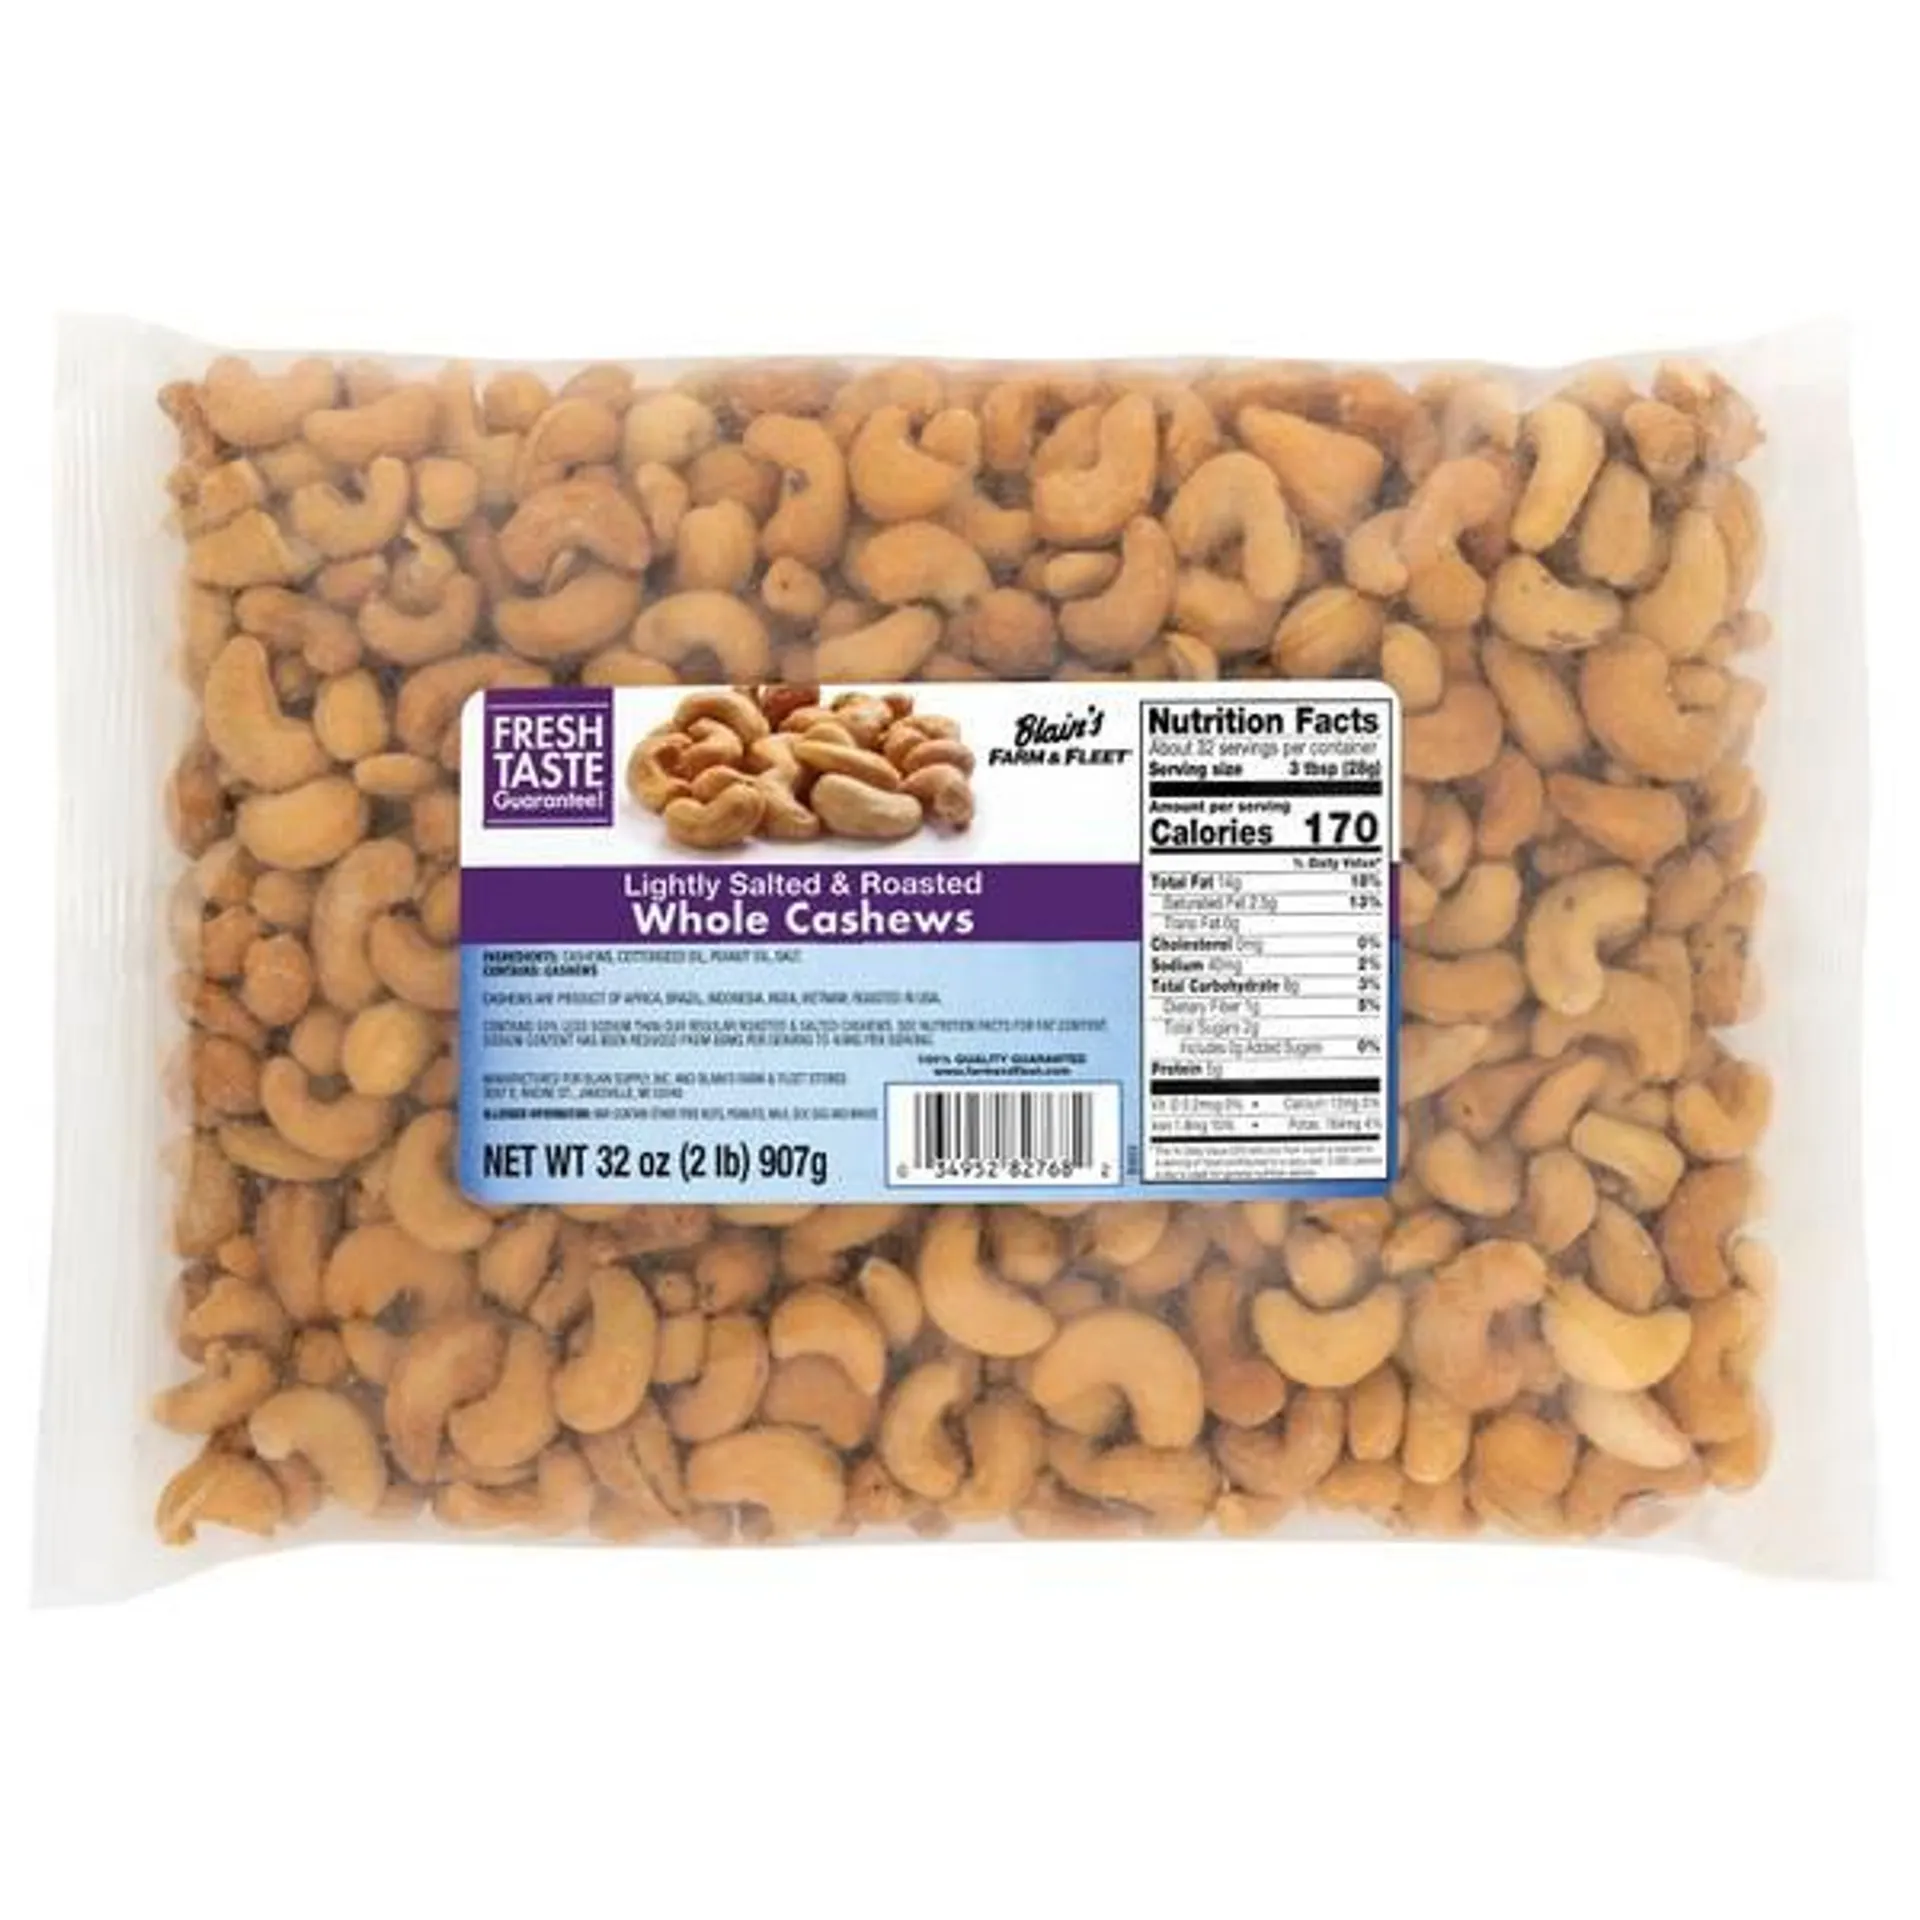 32 oz F&F Roasted and Salted Whole Cashews